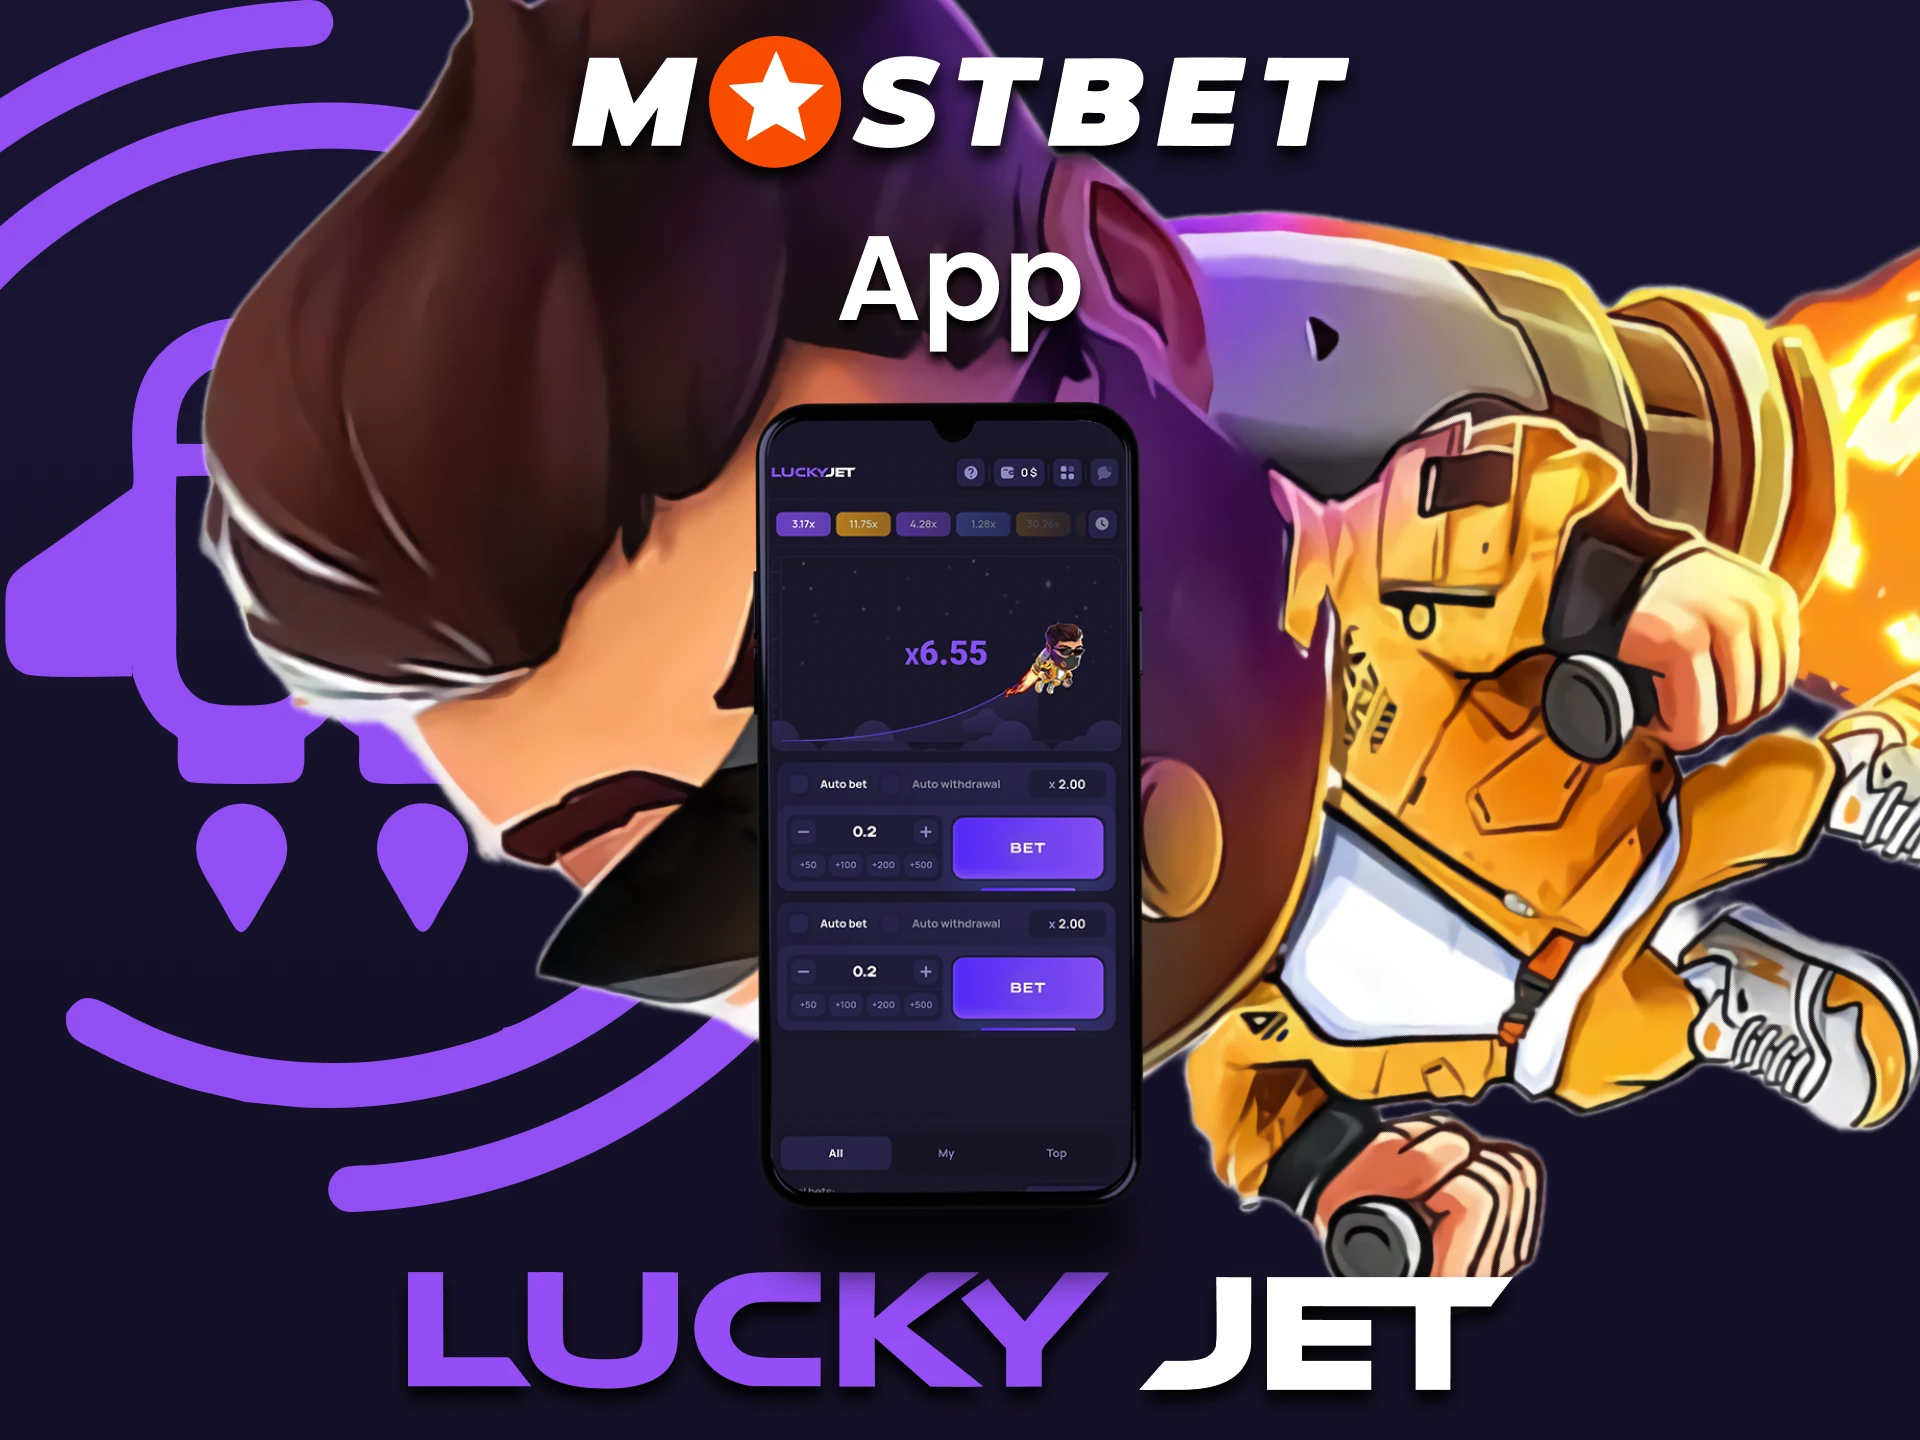 Play Lucke Jet at Mostbet through the app.